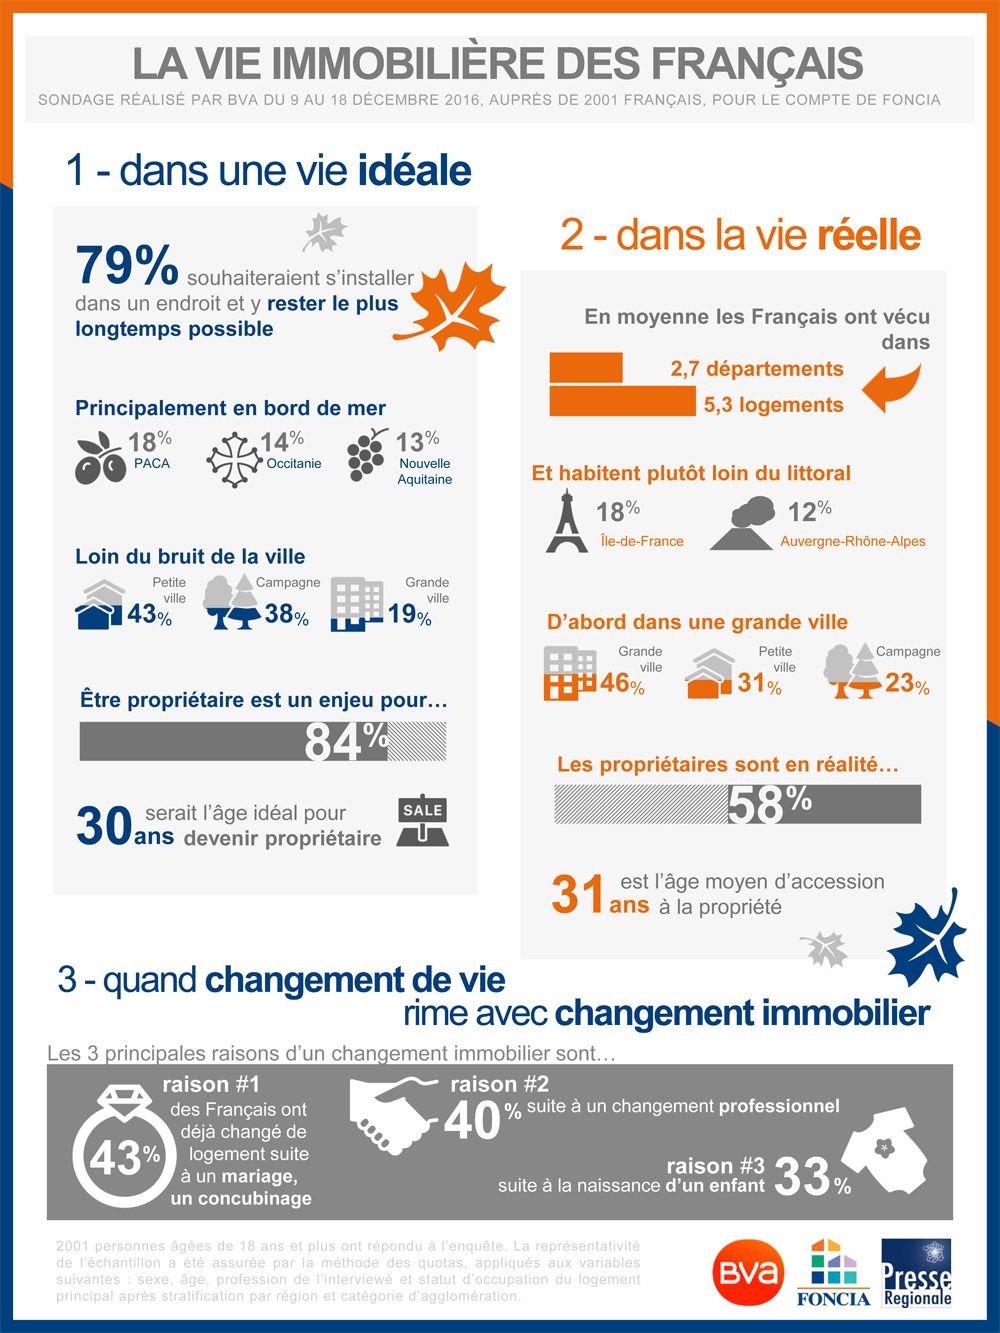 Img - Infographie_vie_immobilier.jpg